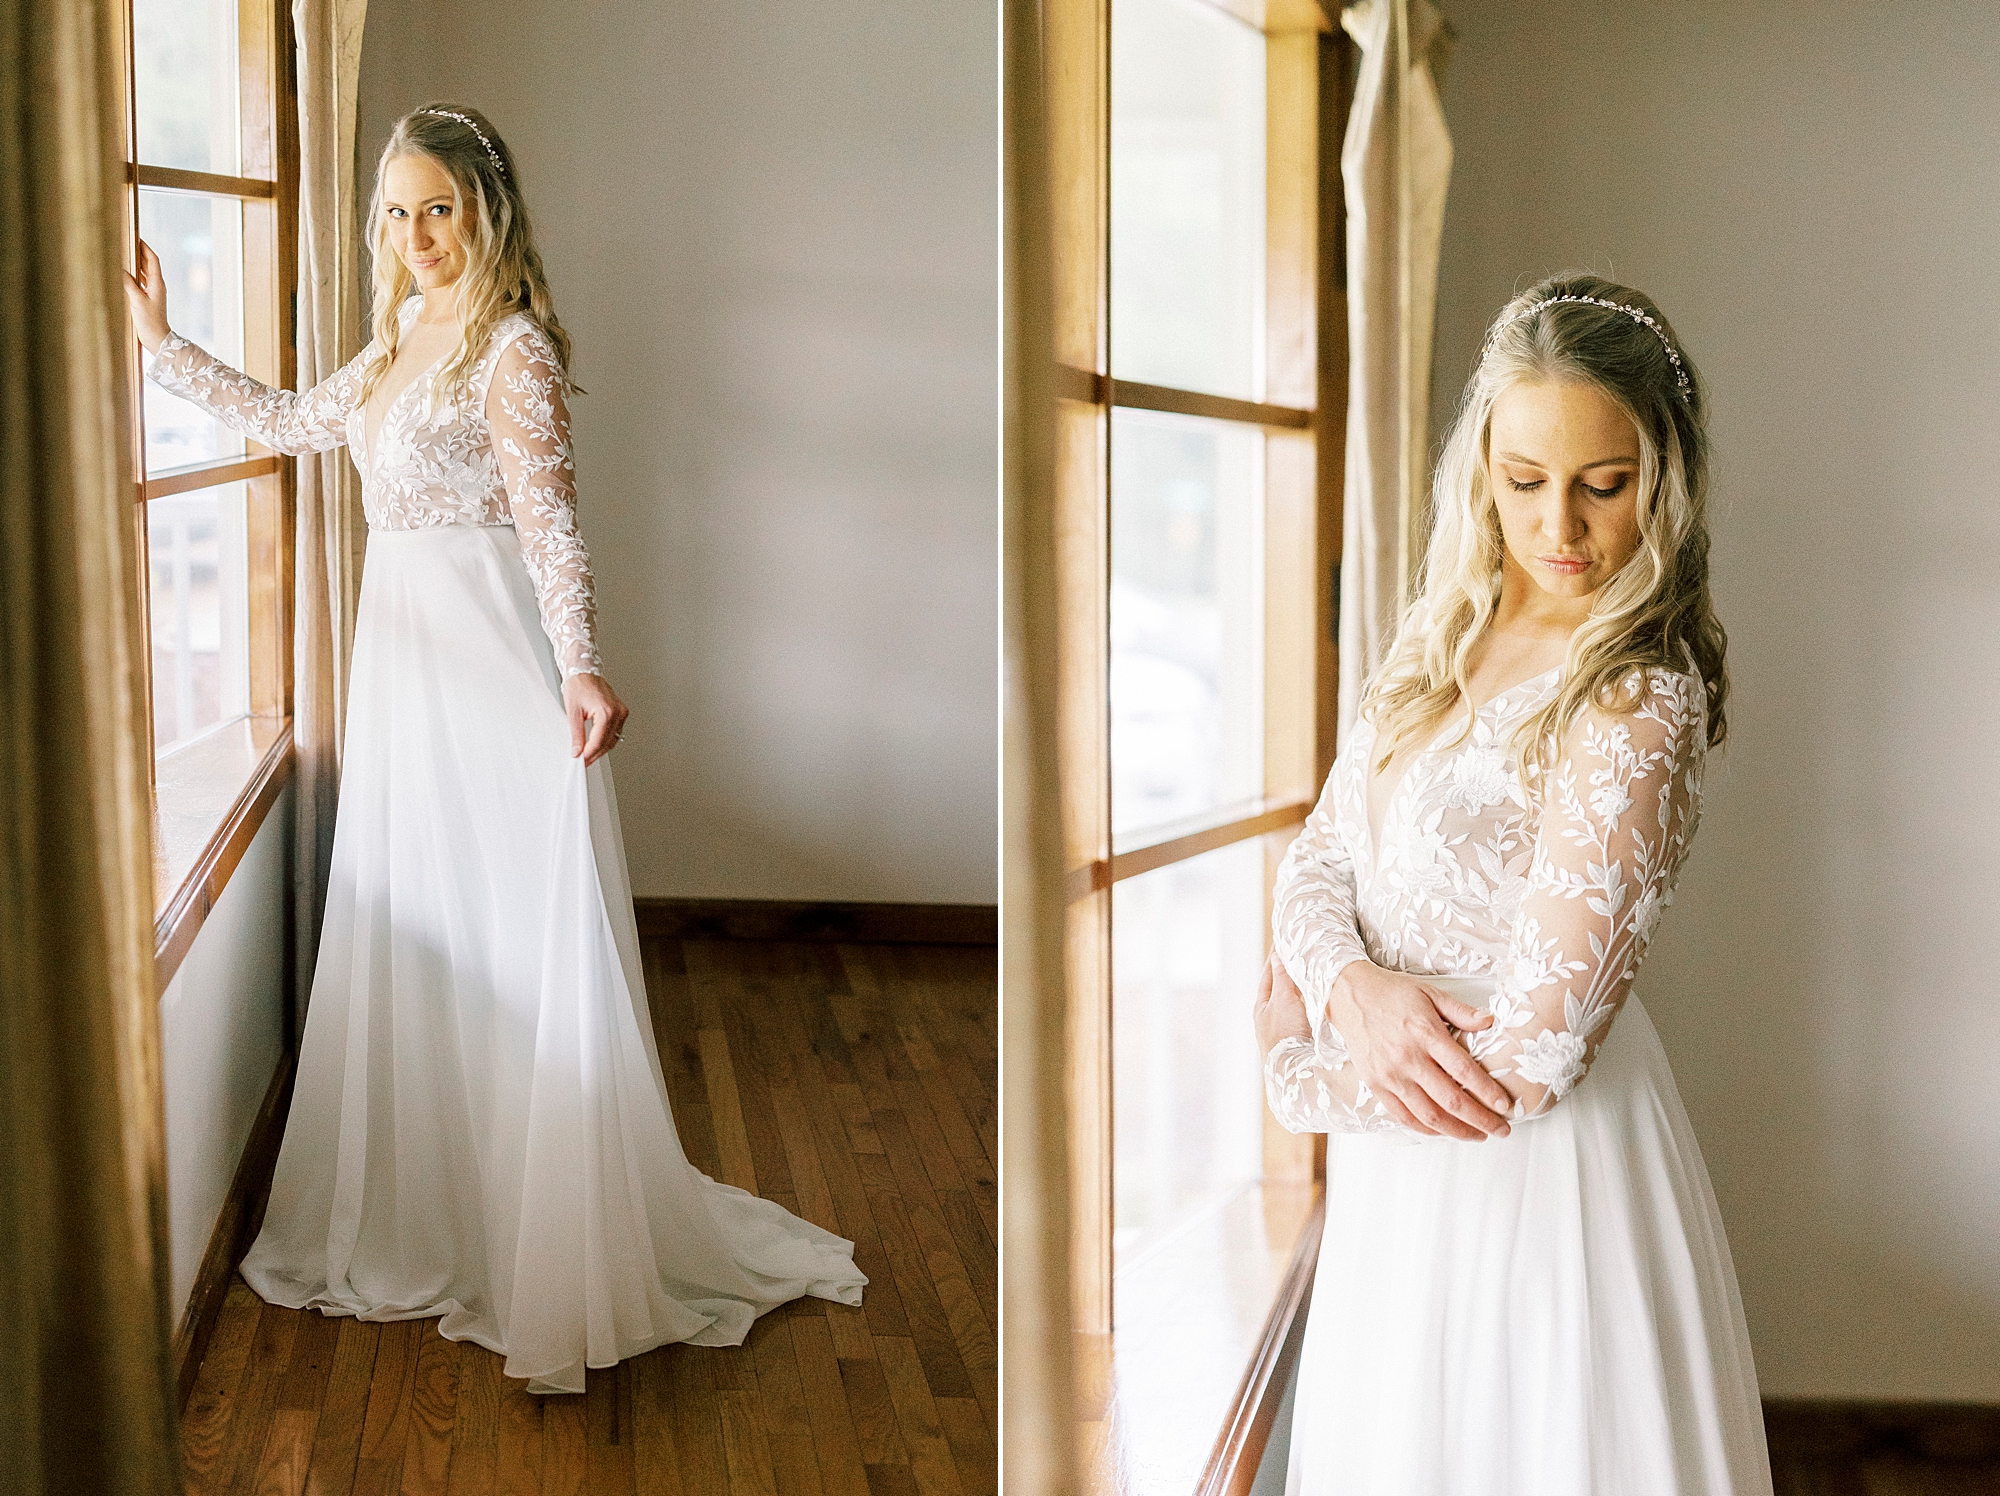 bride in wedding gown with lace bodice poses by wooden window 